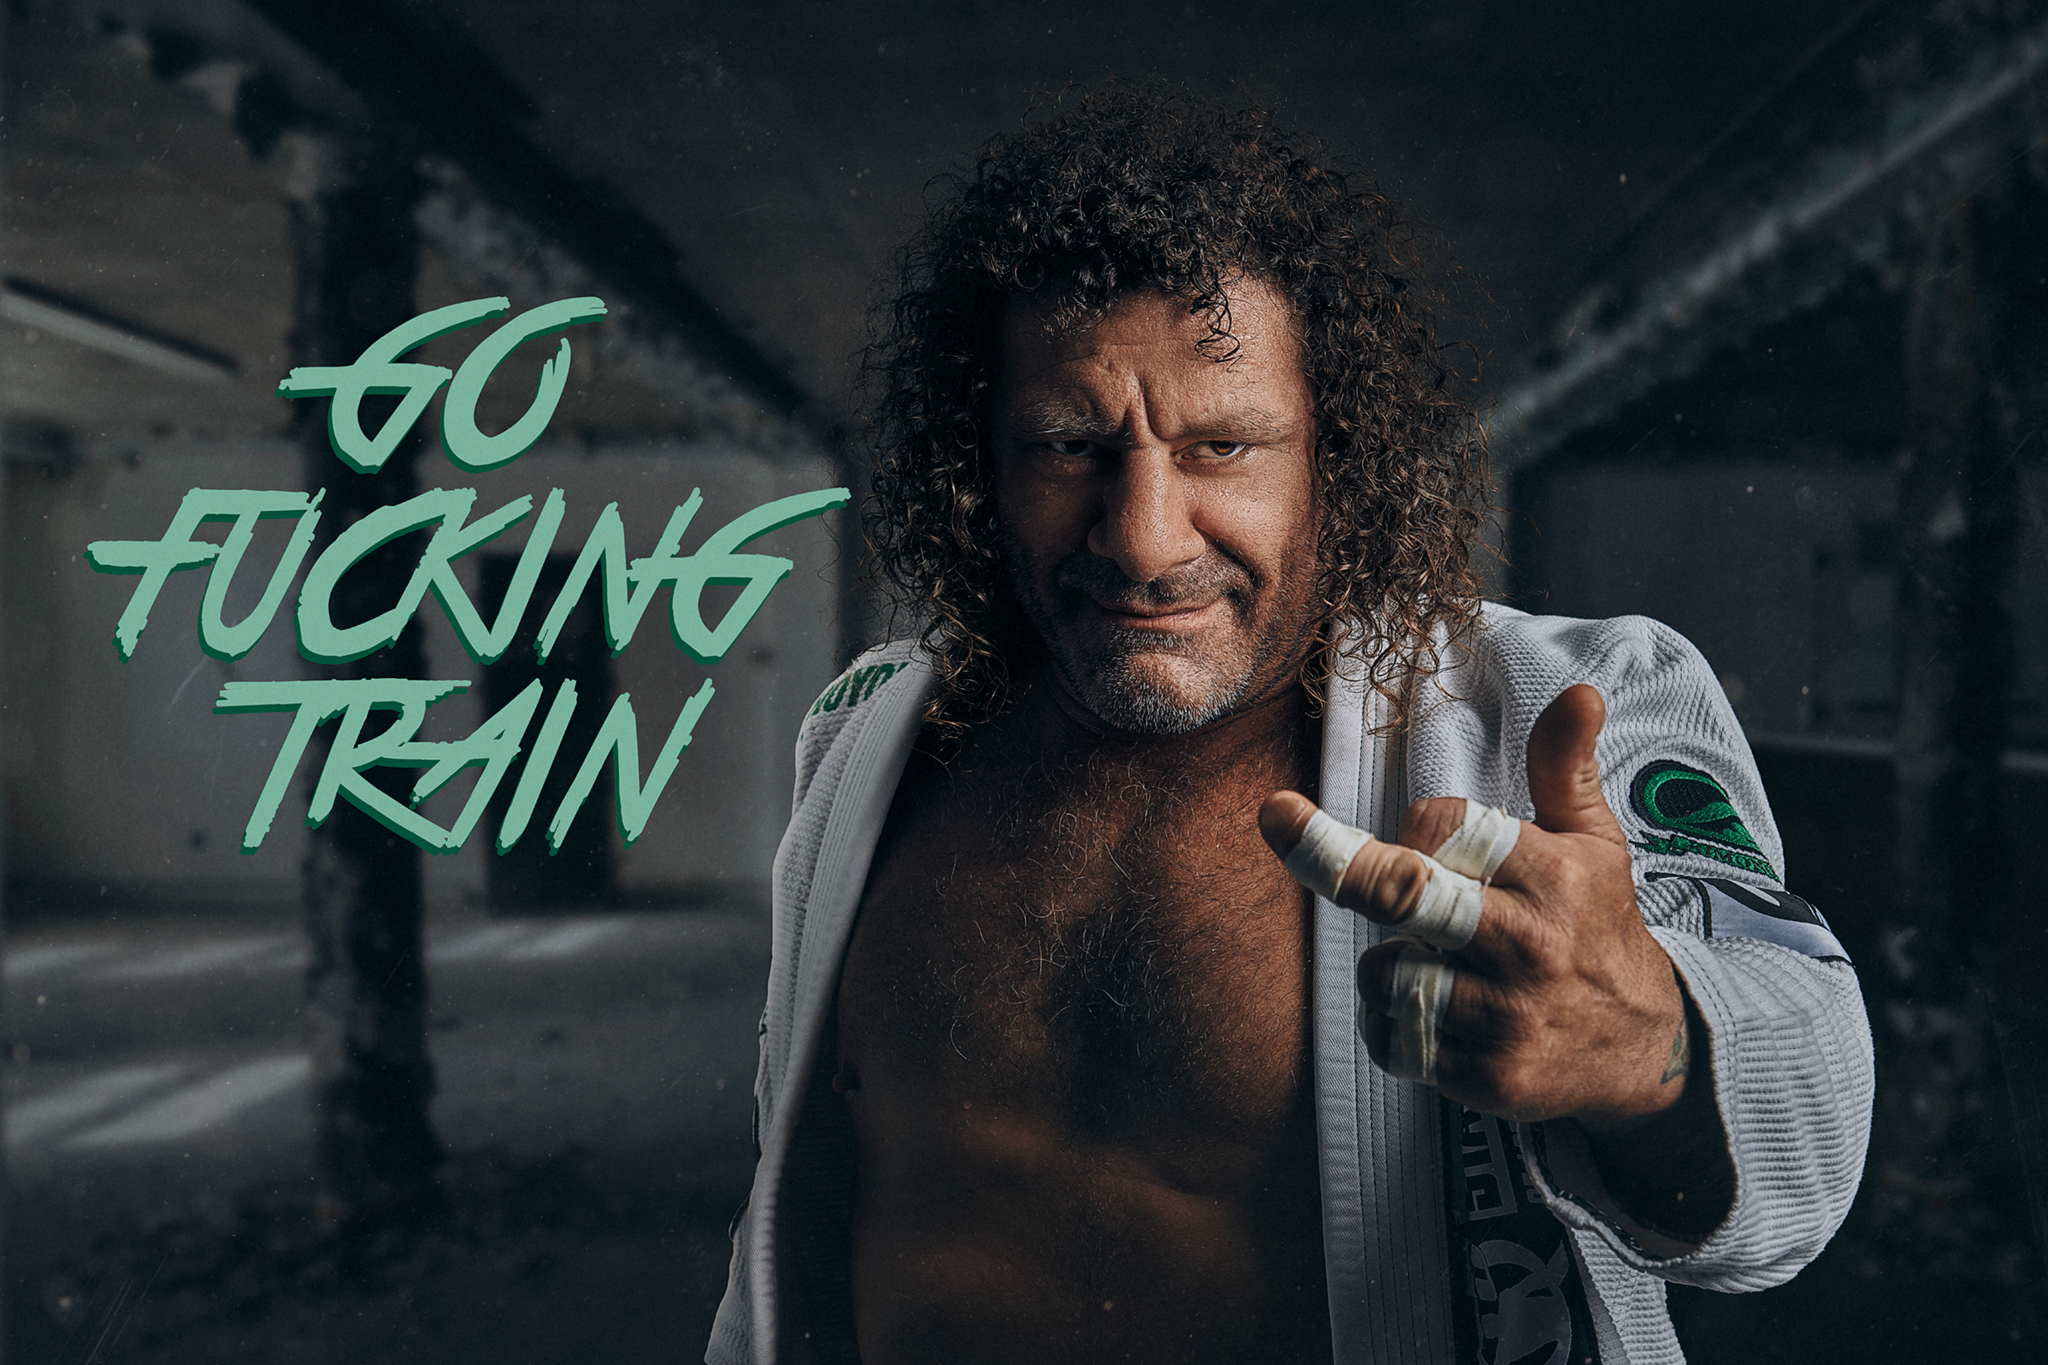 male sports star kurt osiander with middle finger up